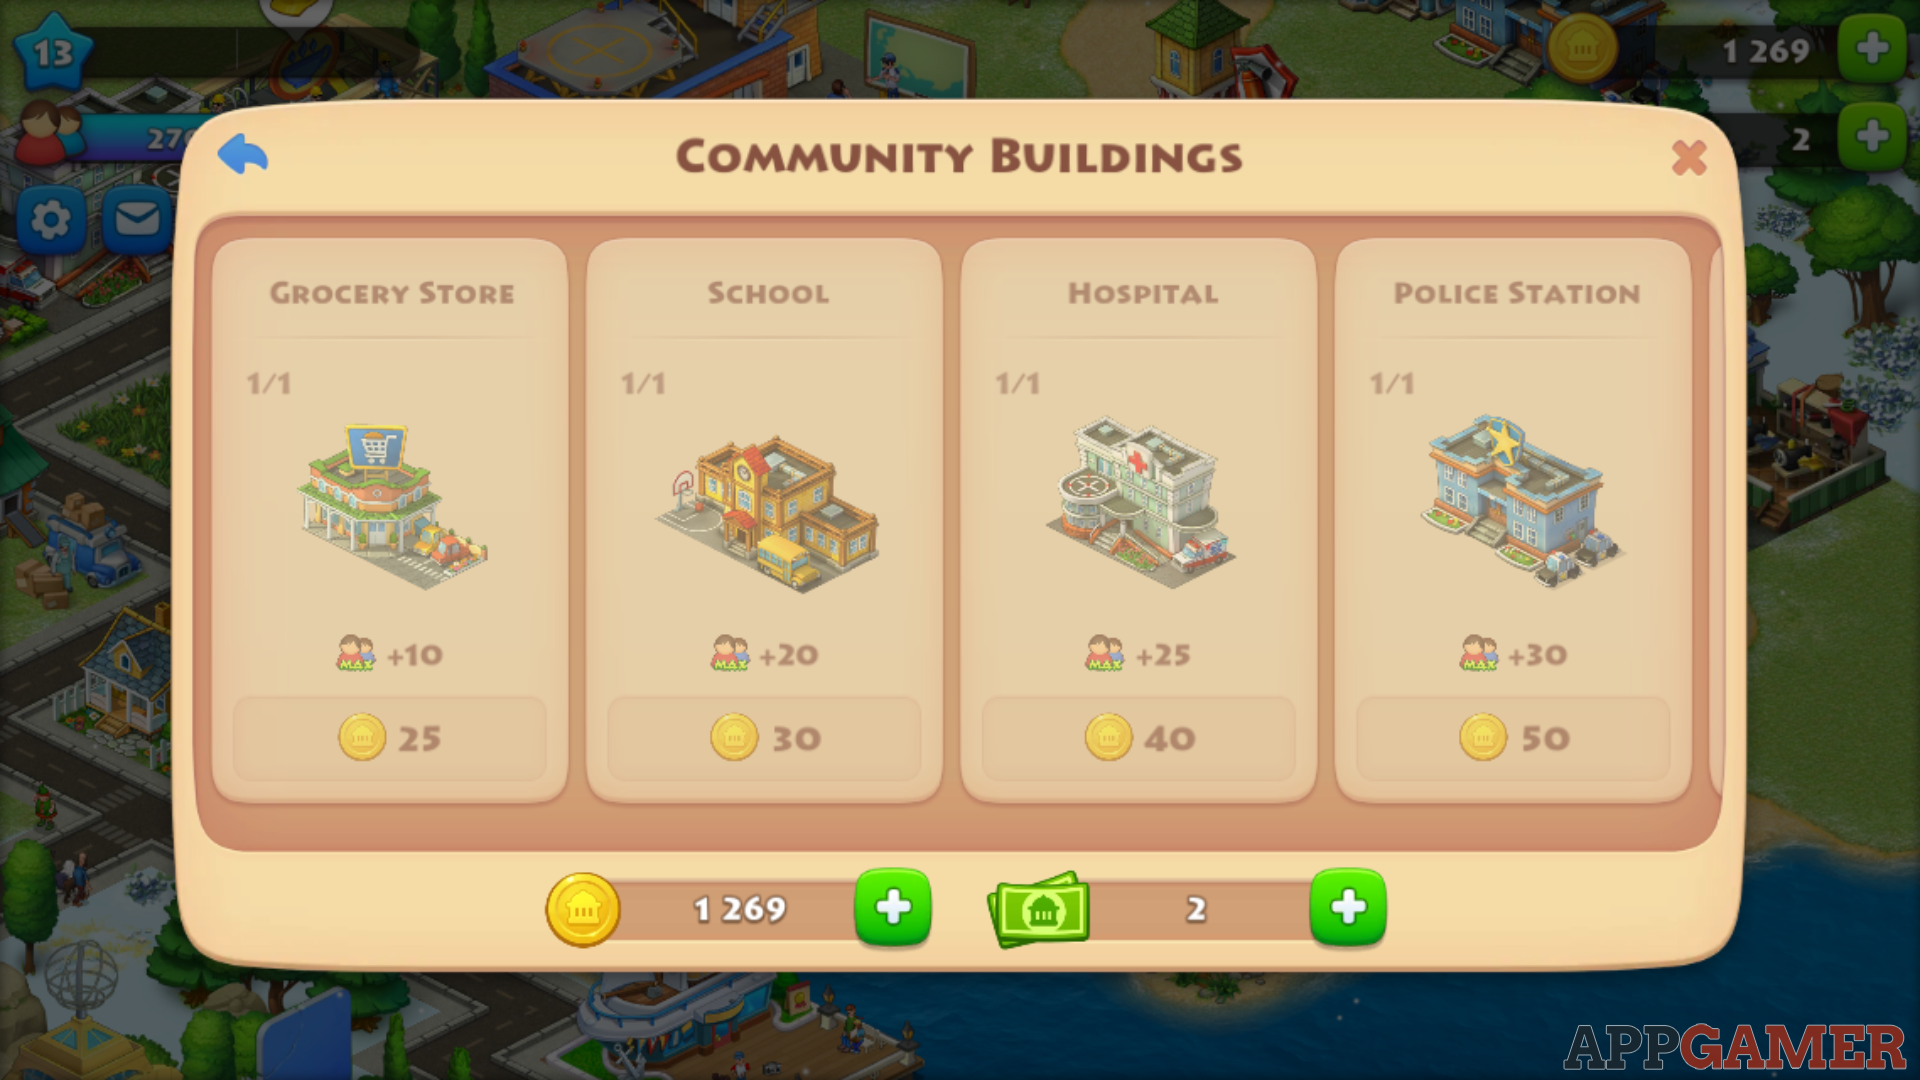 what happens when delete community building in game township